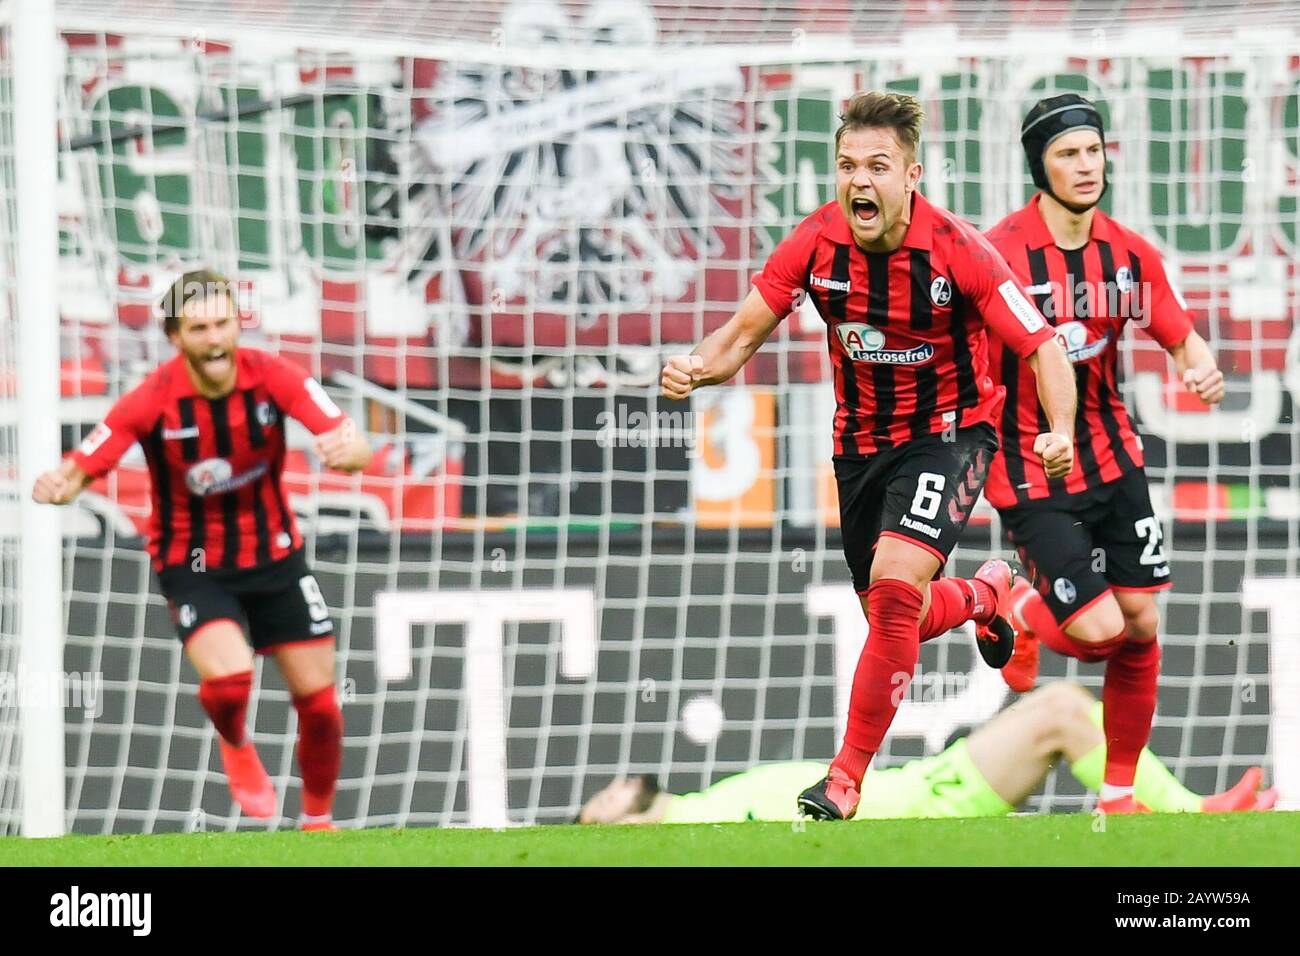 Augsburg, Germany. 15th Feb, 2020. Football: Bundesliga, 22nd matchday, FC Augsburg - SC Freiburg, WWK Arena. Freiburg's Amir Abrashi (M) cheers after Haberer's goal for 1:1. Credit: Tom Weller/dpa - IMPORTANT NOTE: In accordance with the regulations of the DFL Deutsche Fußball Liga and the DFB Deutscher Fußball-Bund, it is prohibited to exploit or have exploited in the stadium and/or from the game taken photographs in the form of sequence images and/or video-like photo series./dpa/Alamy Live News Stock Photo